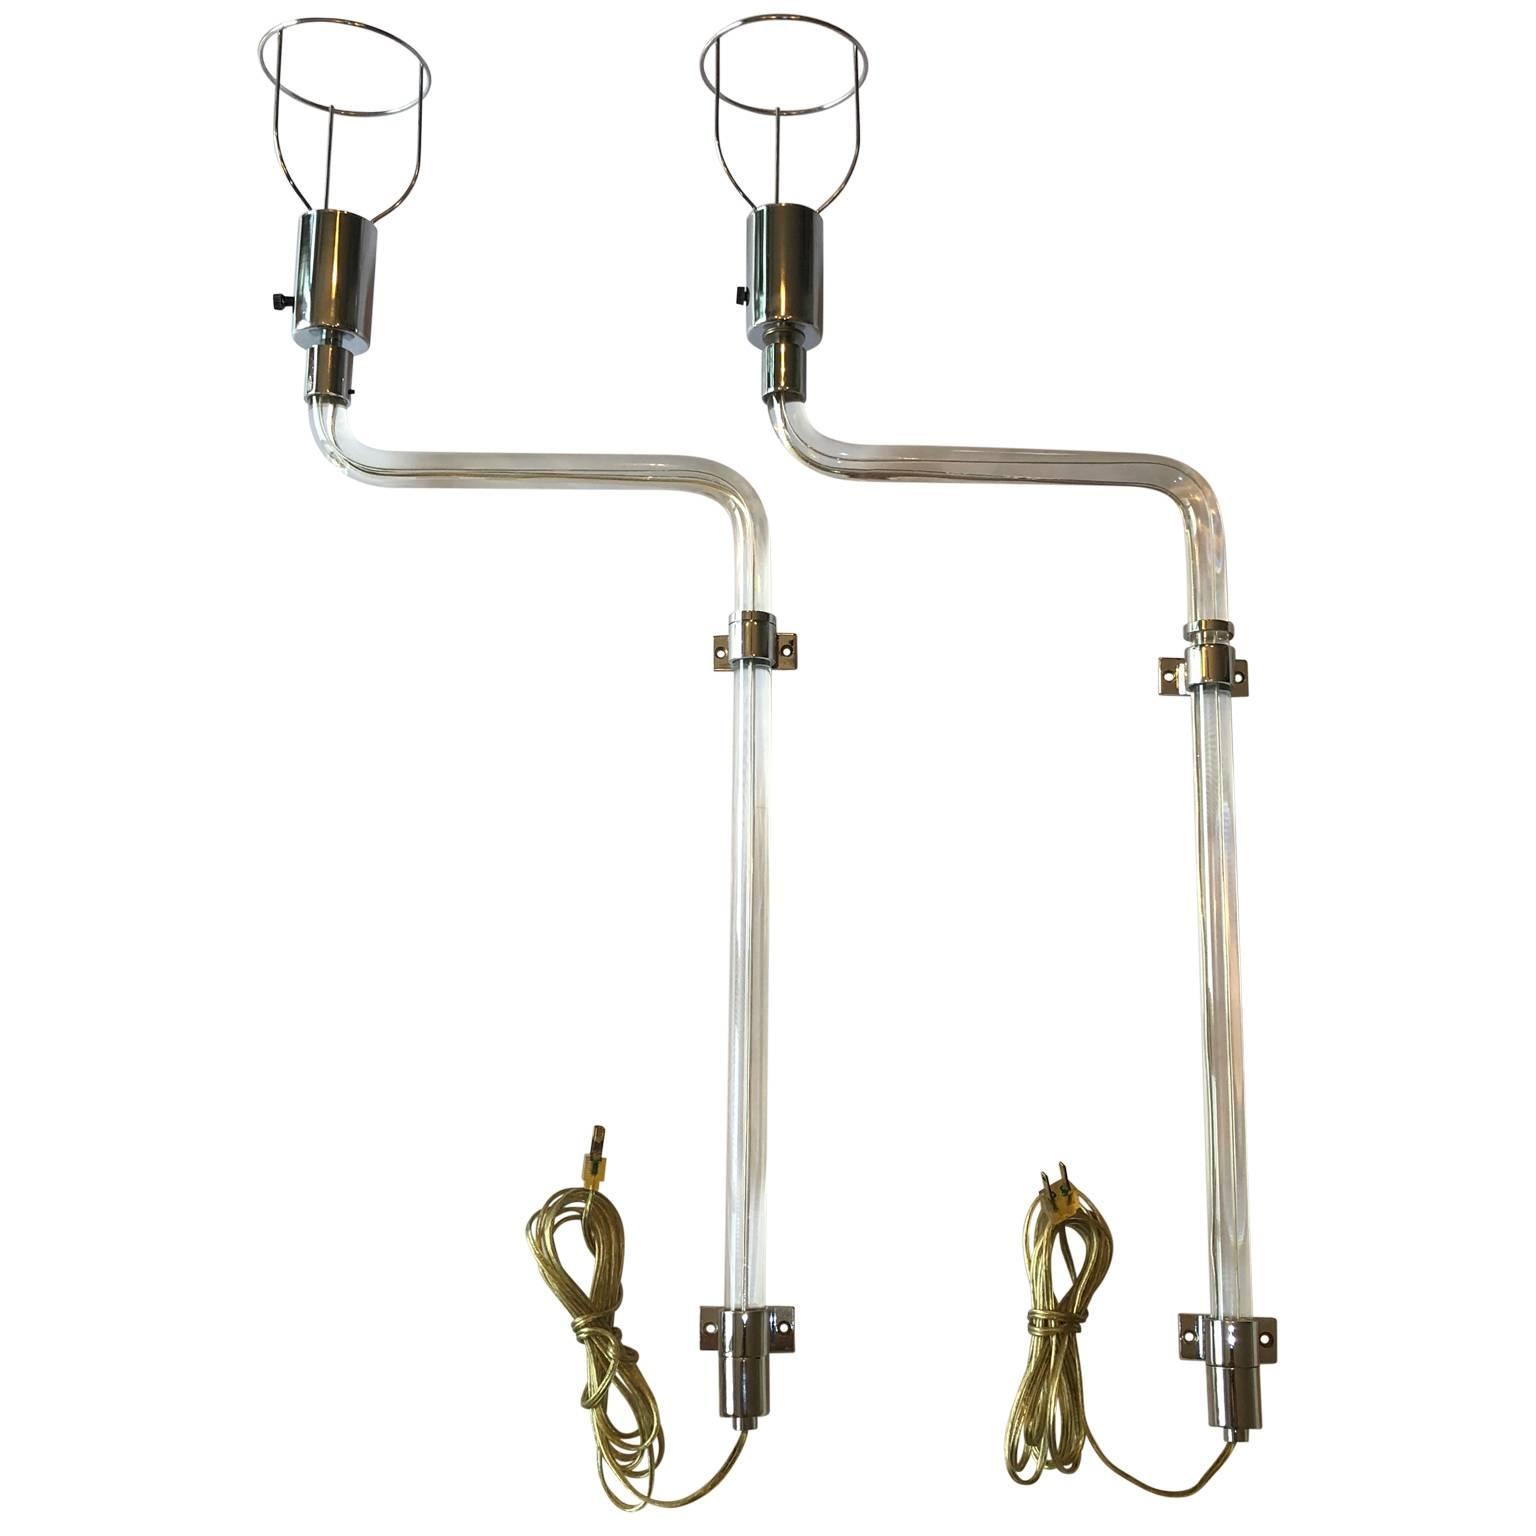 Hand-Crafted Pair of Peter Hamburger Lucite And Chrome Wall Sconces, circa 1970's